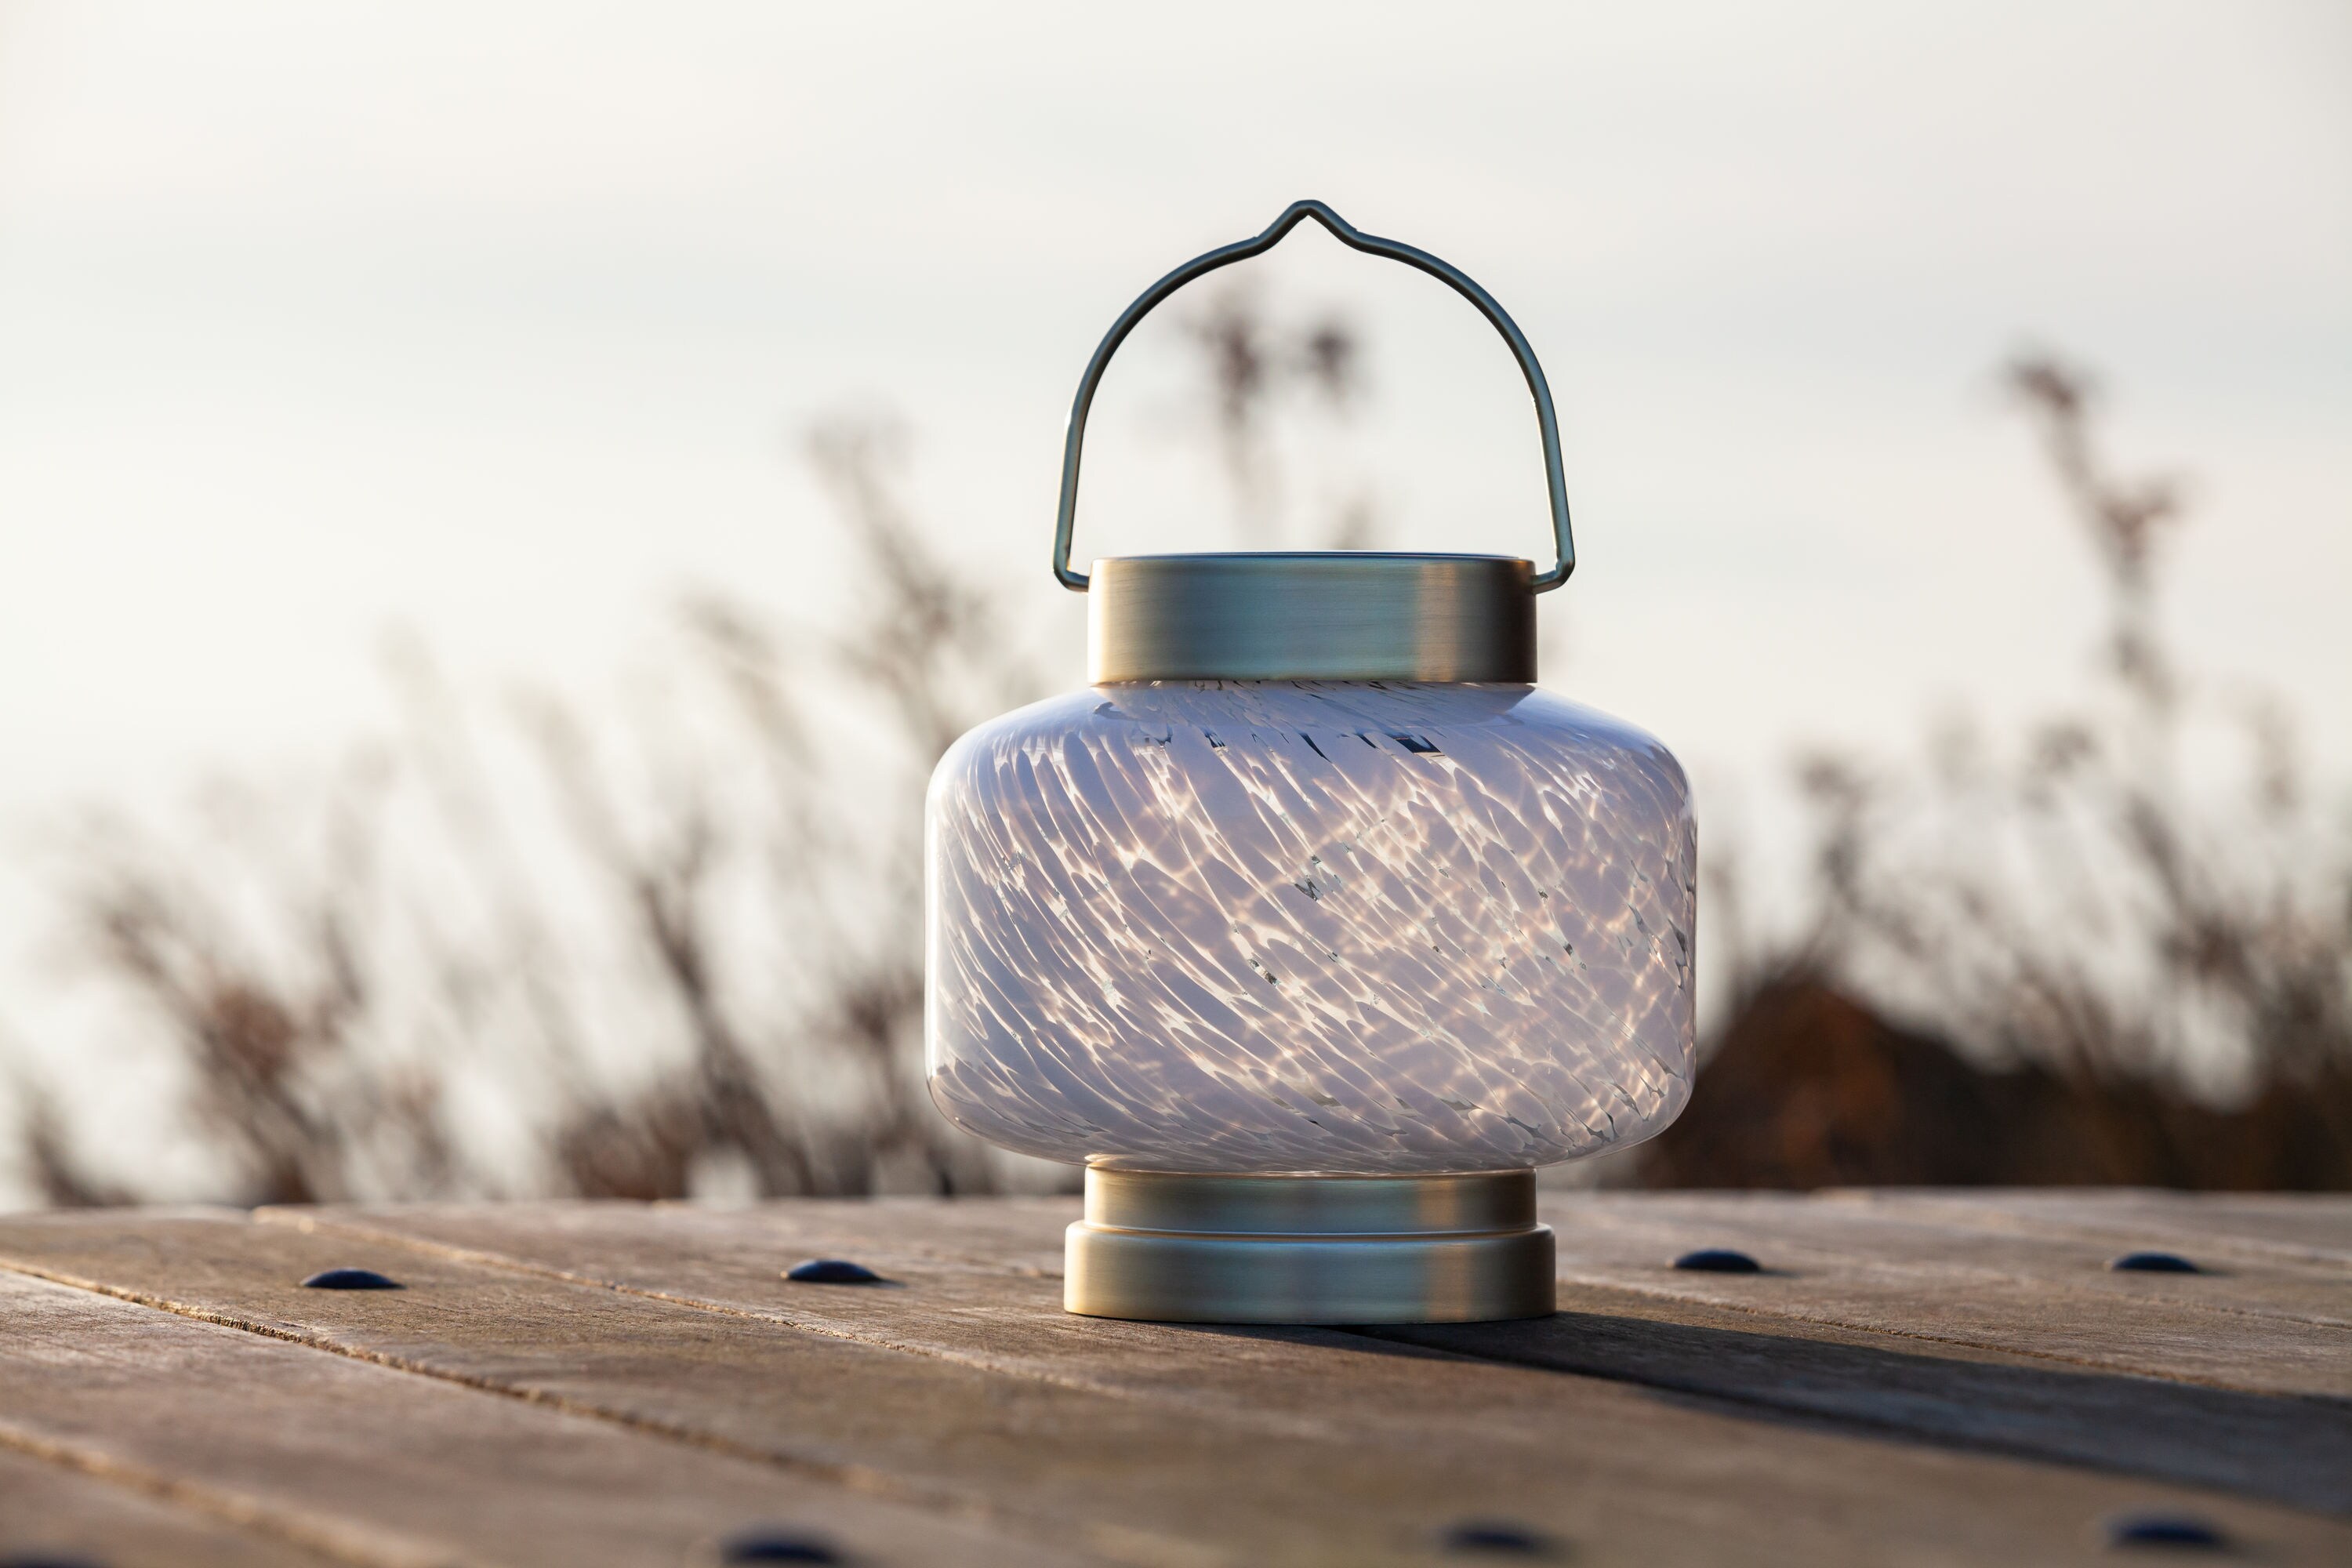 Handblown Glass with Solar Panel and LED Light 1-Count Allsop Home and Garden Solar Boaters Lantern Cylinder Garden Cylinder/White Weather-Resistant for Outdoor Deck Patio 